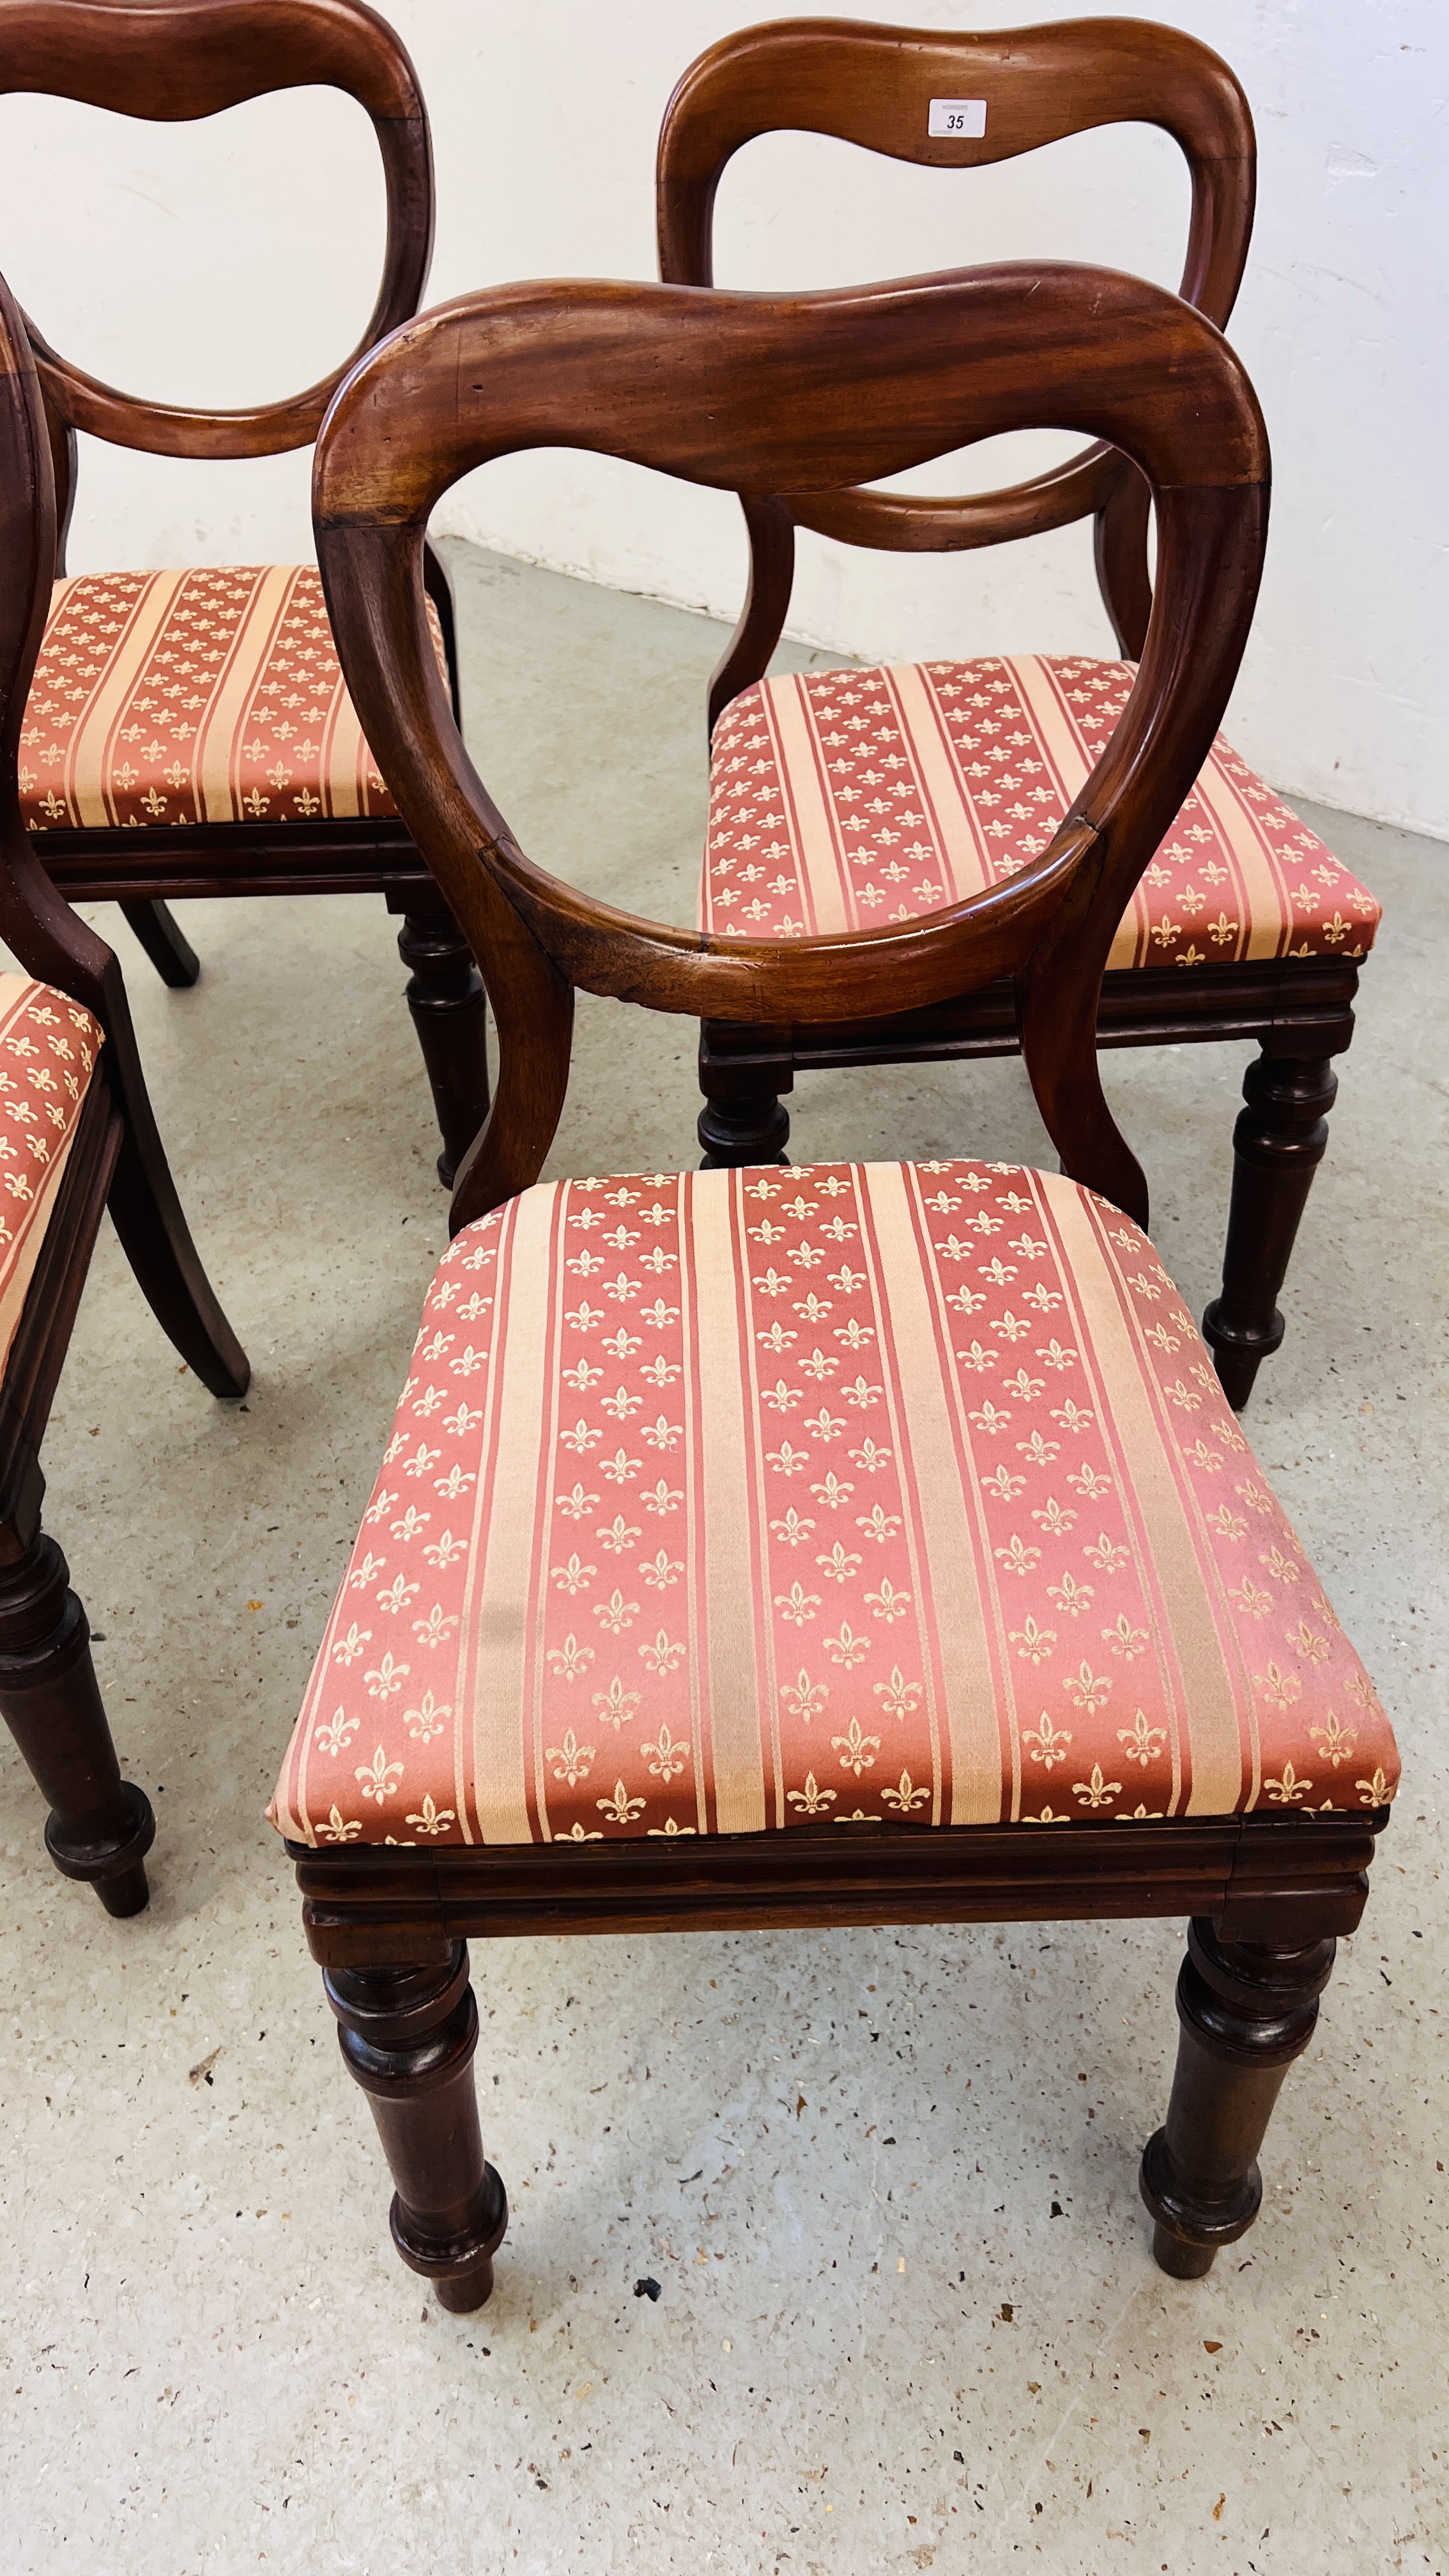 A SET OF FOUR VICTORIAN MAHOGANY SPOON BACK DINING CHAIRS. - Image 3 of 11